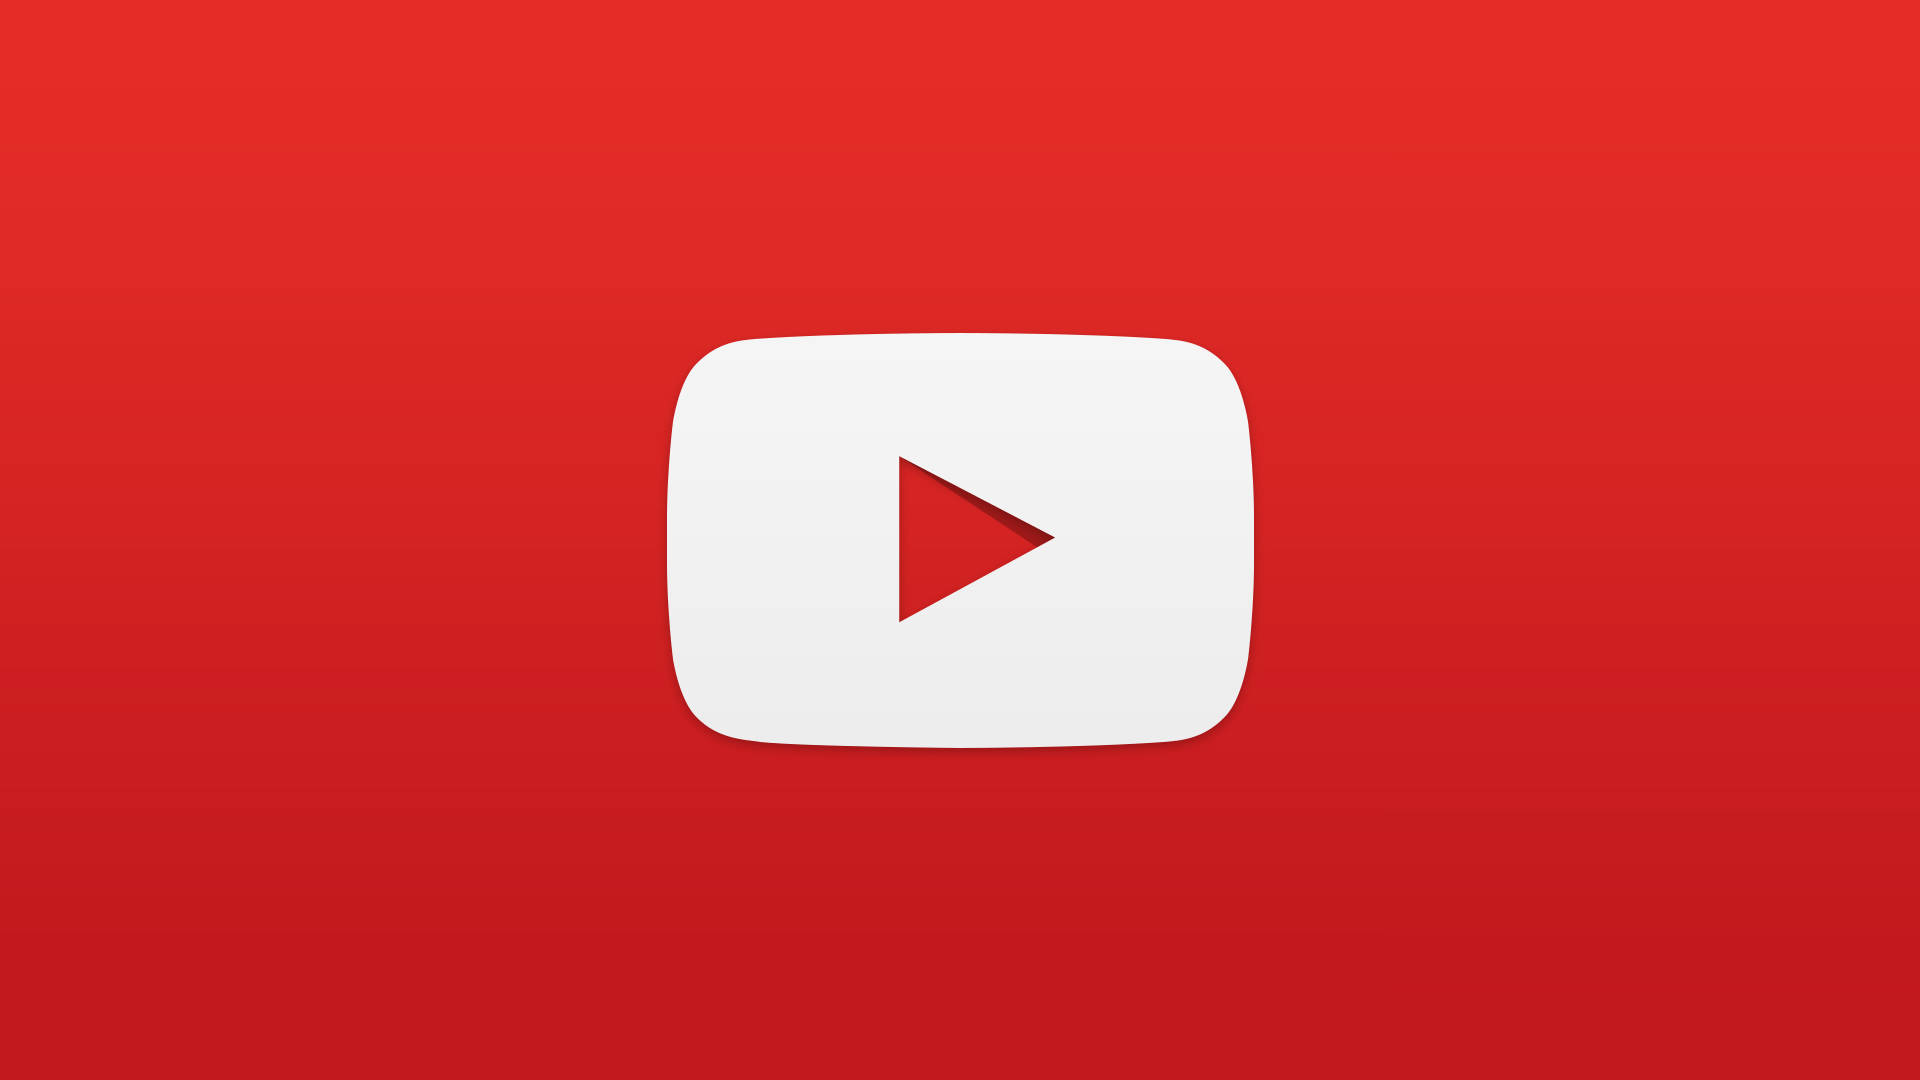 Aesthetic Youtube Red Button Logo Background